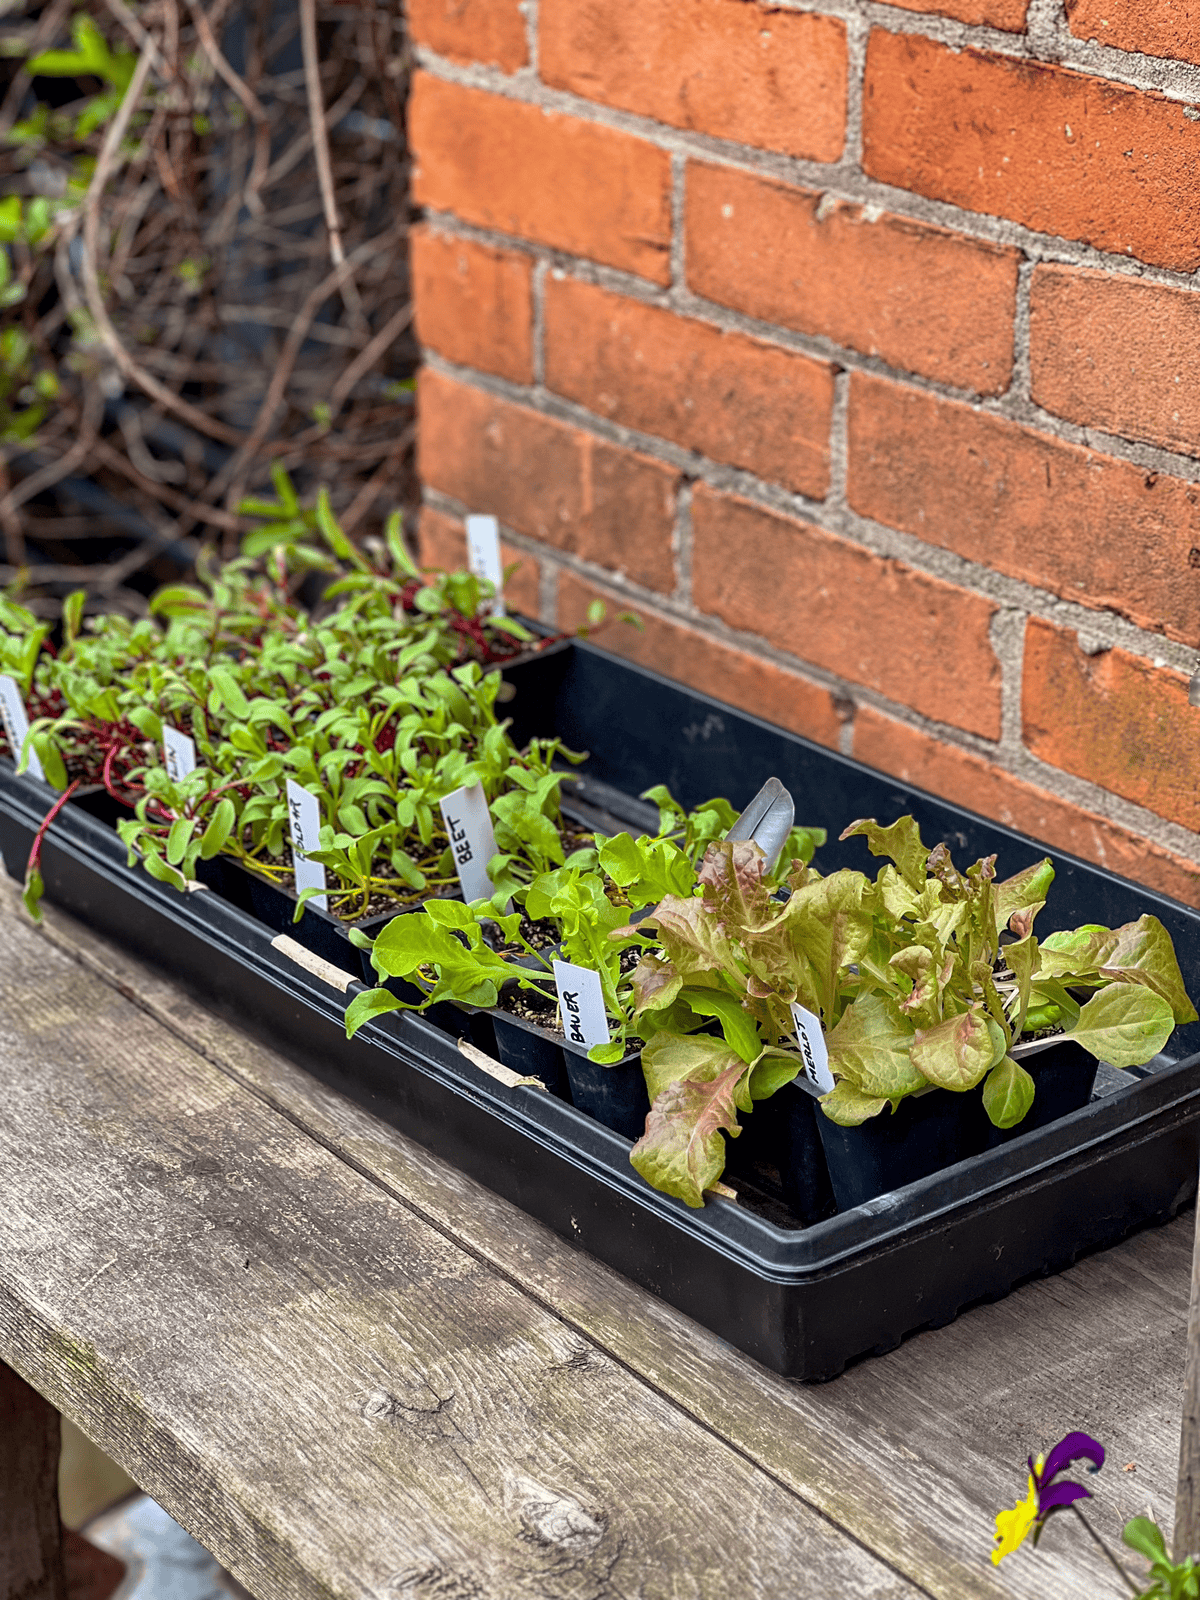 A flat of beet and lettuce seedlings hardening off on a wood table next to a brick wall.